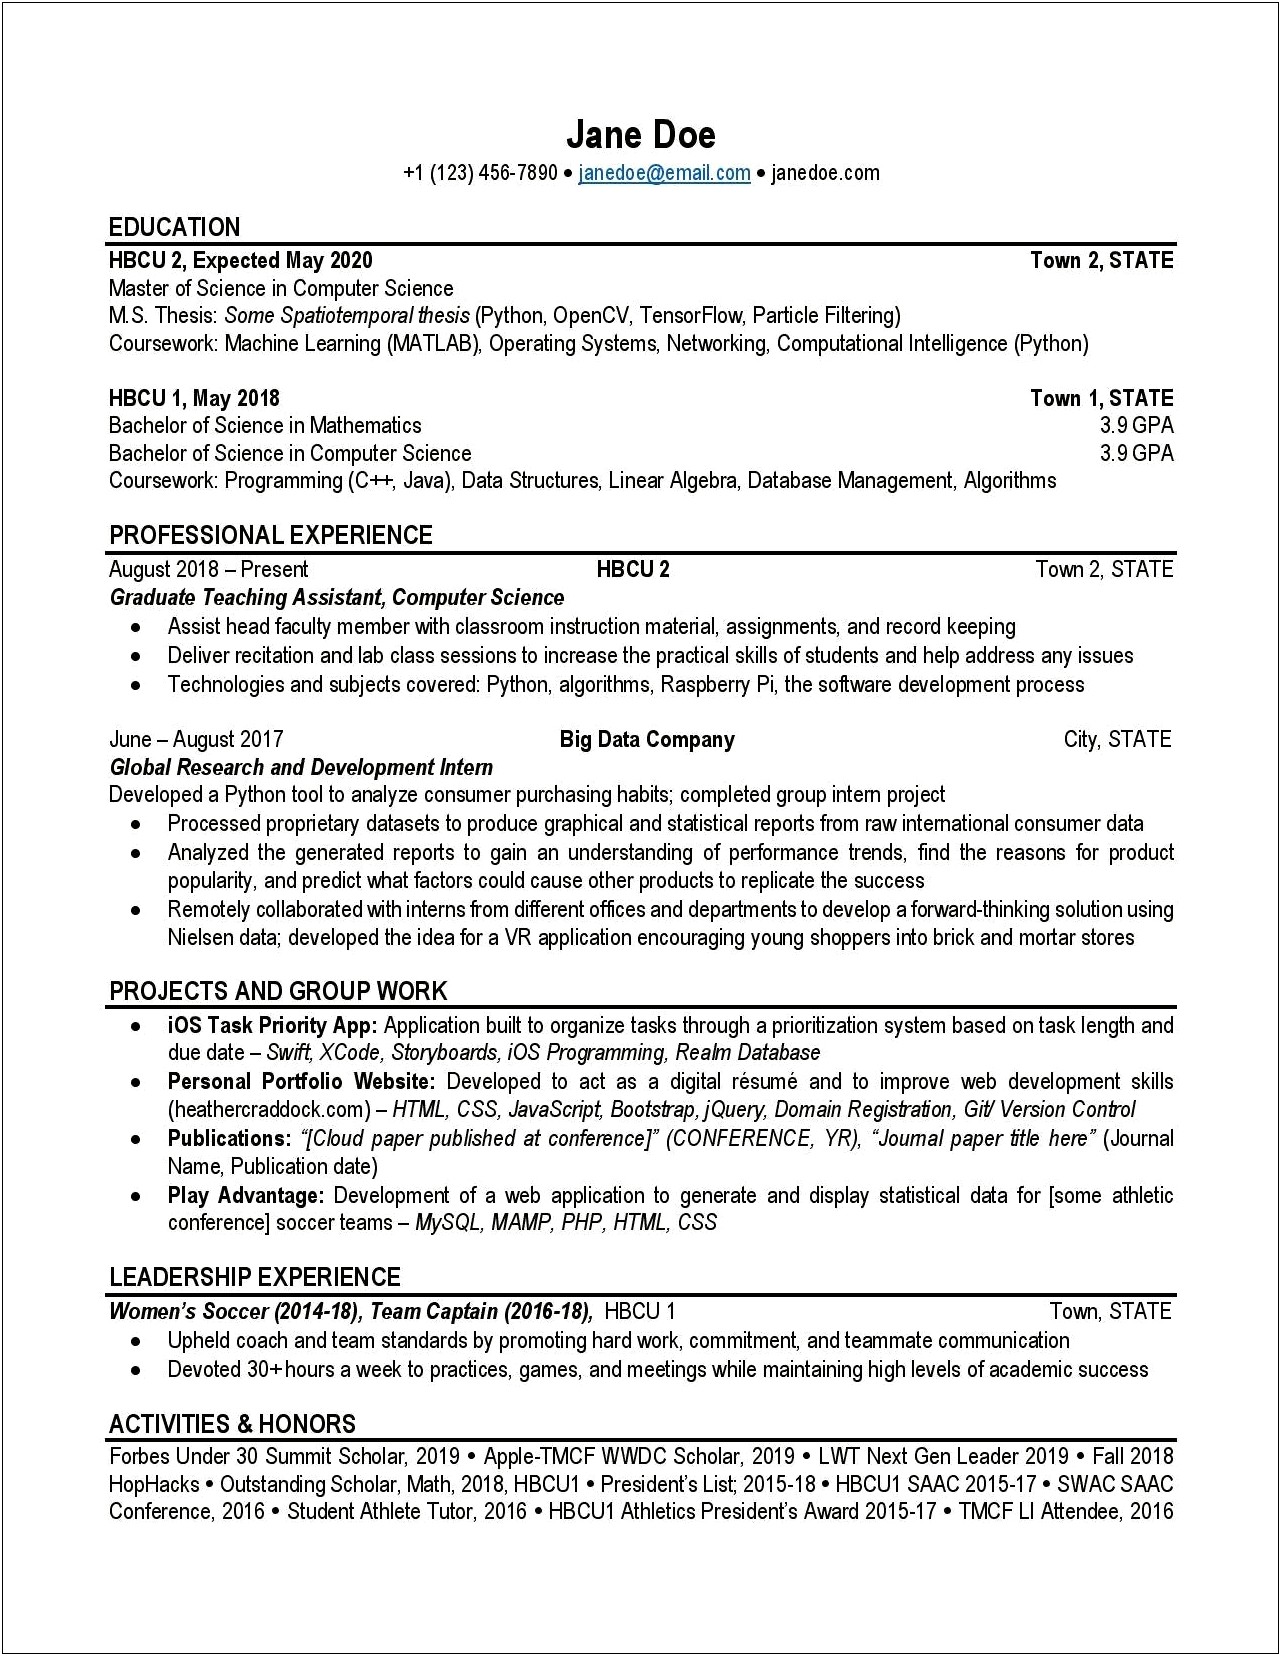 Entry Level Computer Science Graduate Resume Template